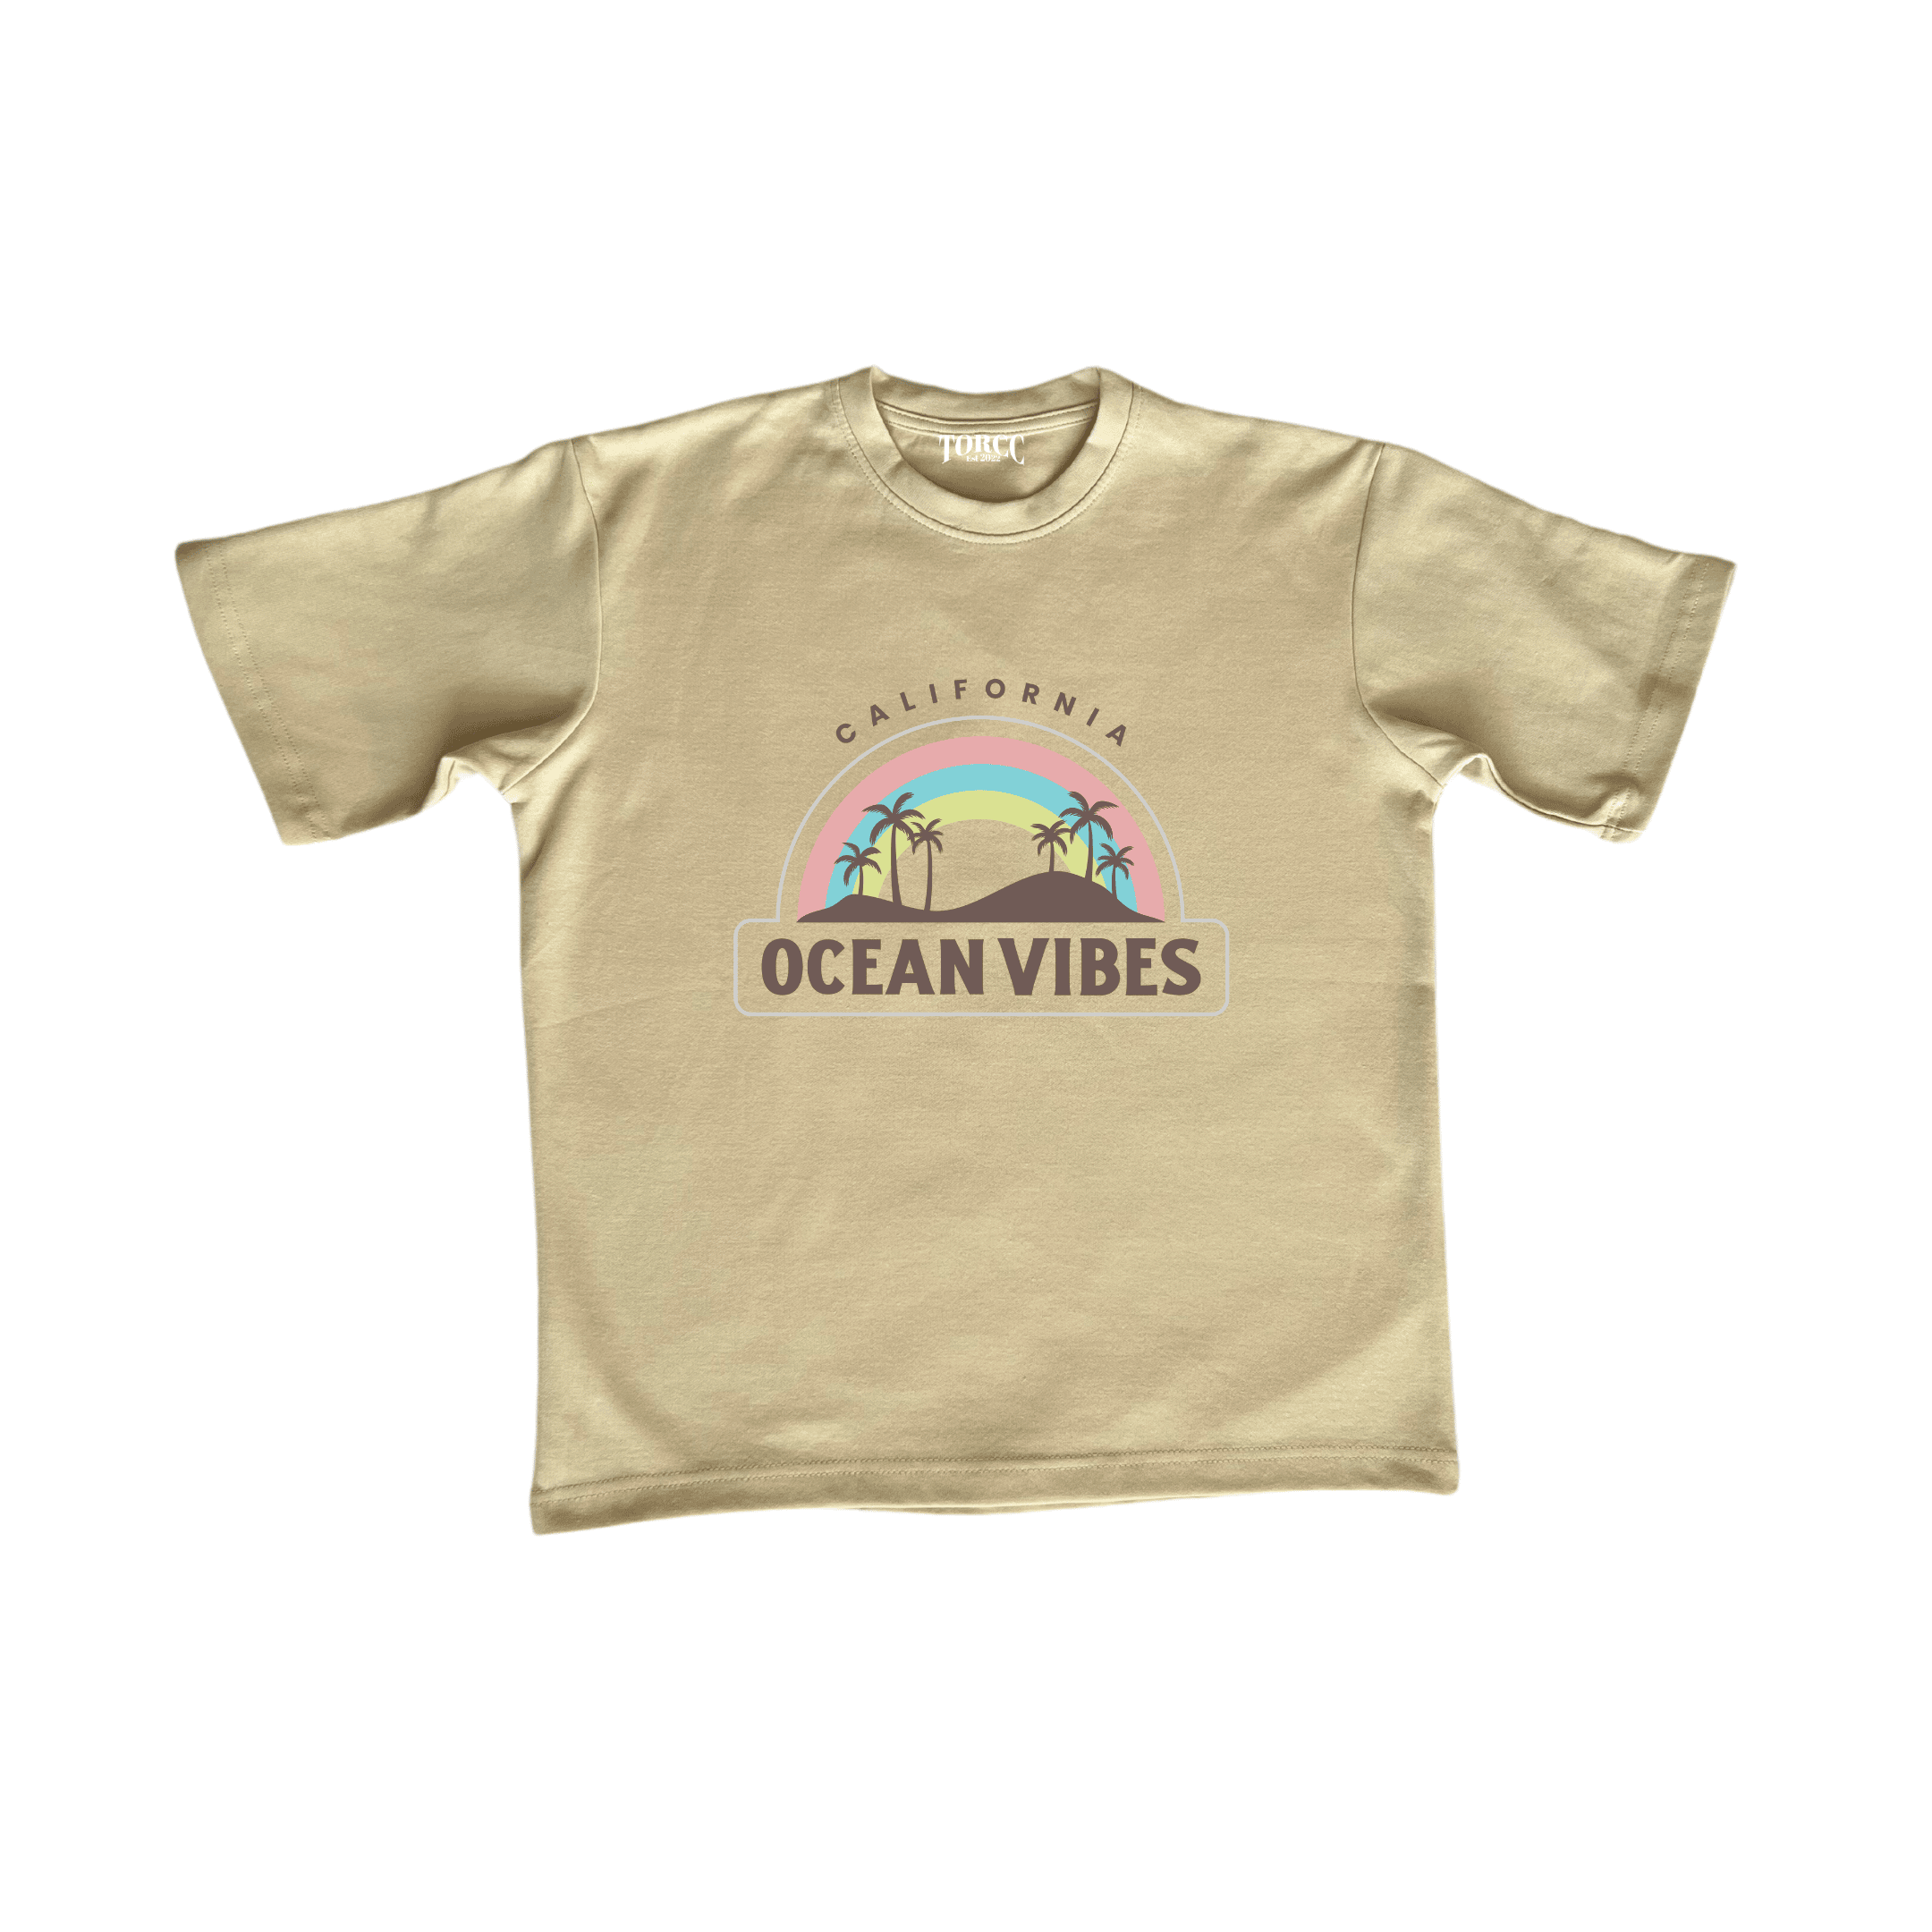 California - Ocean Vibes: Oversized Graphic Tees